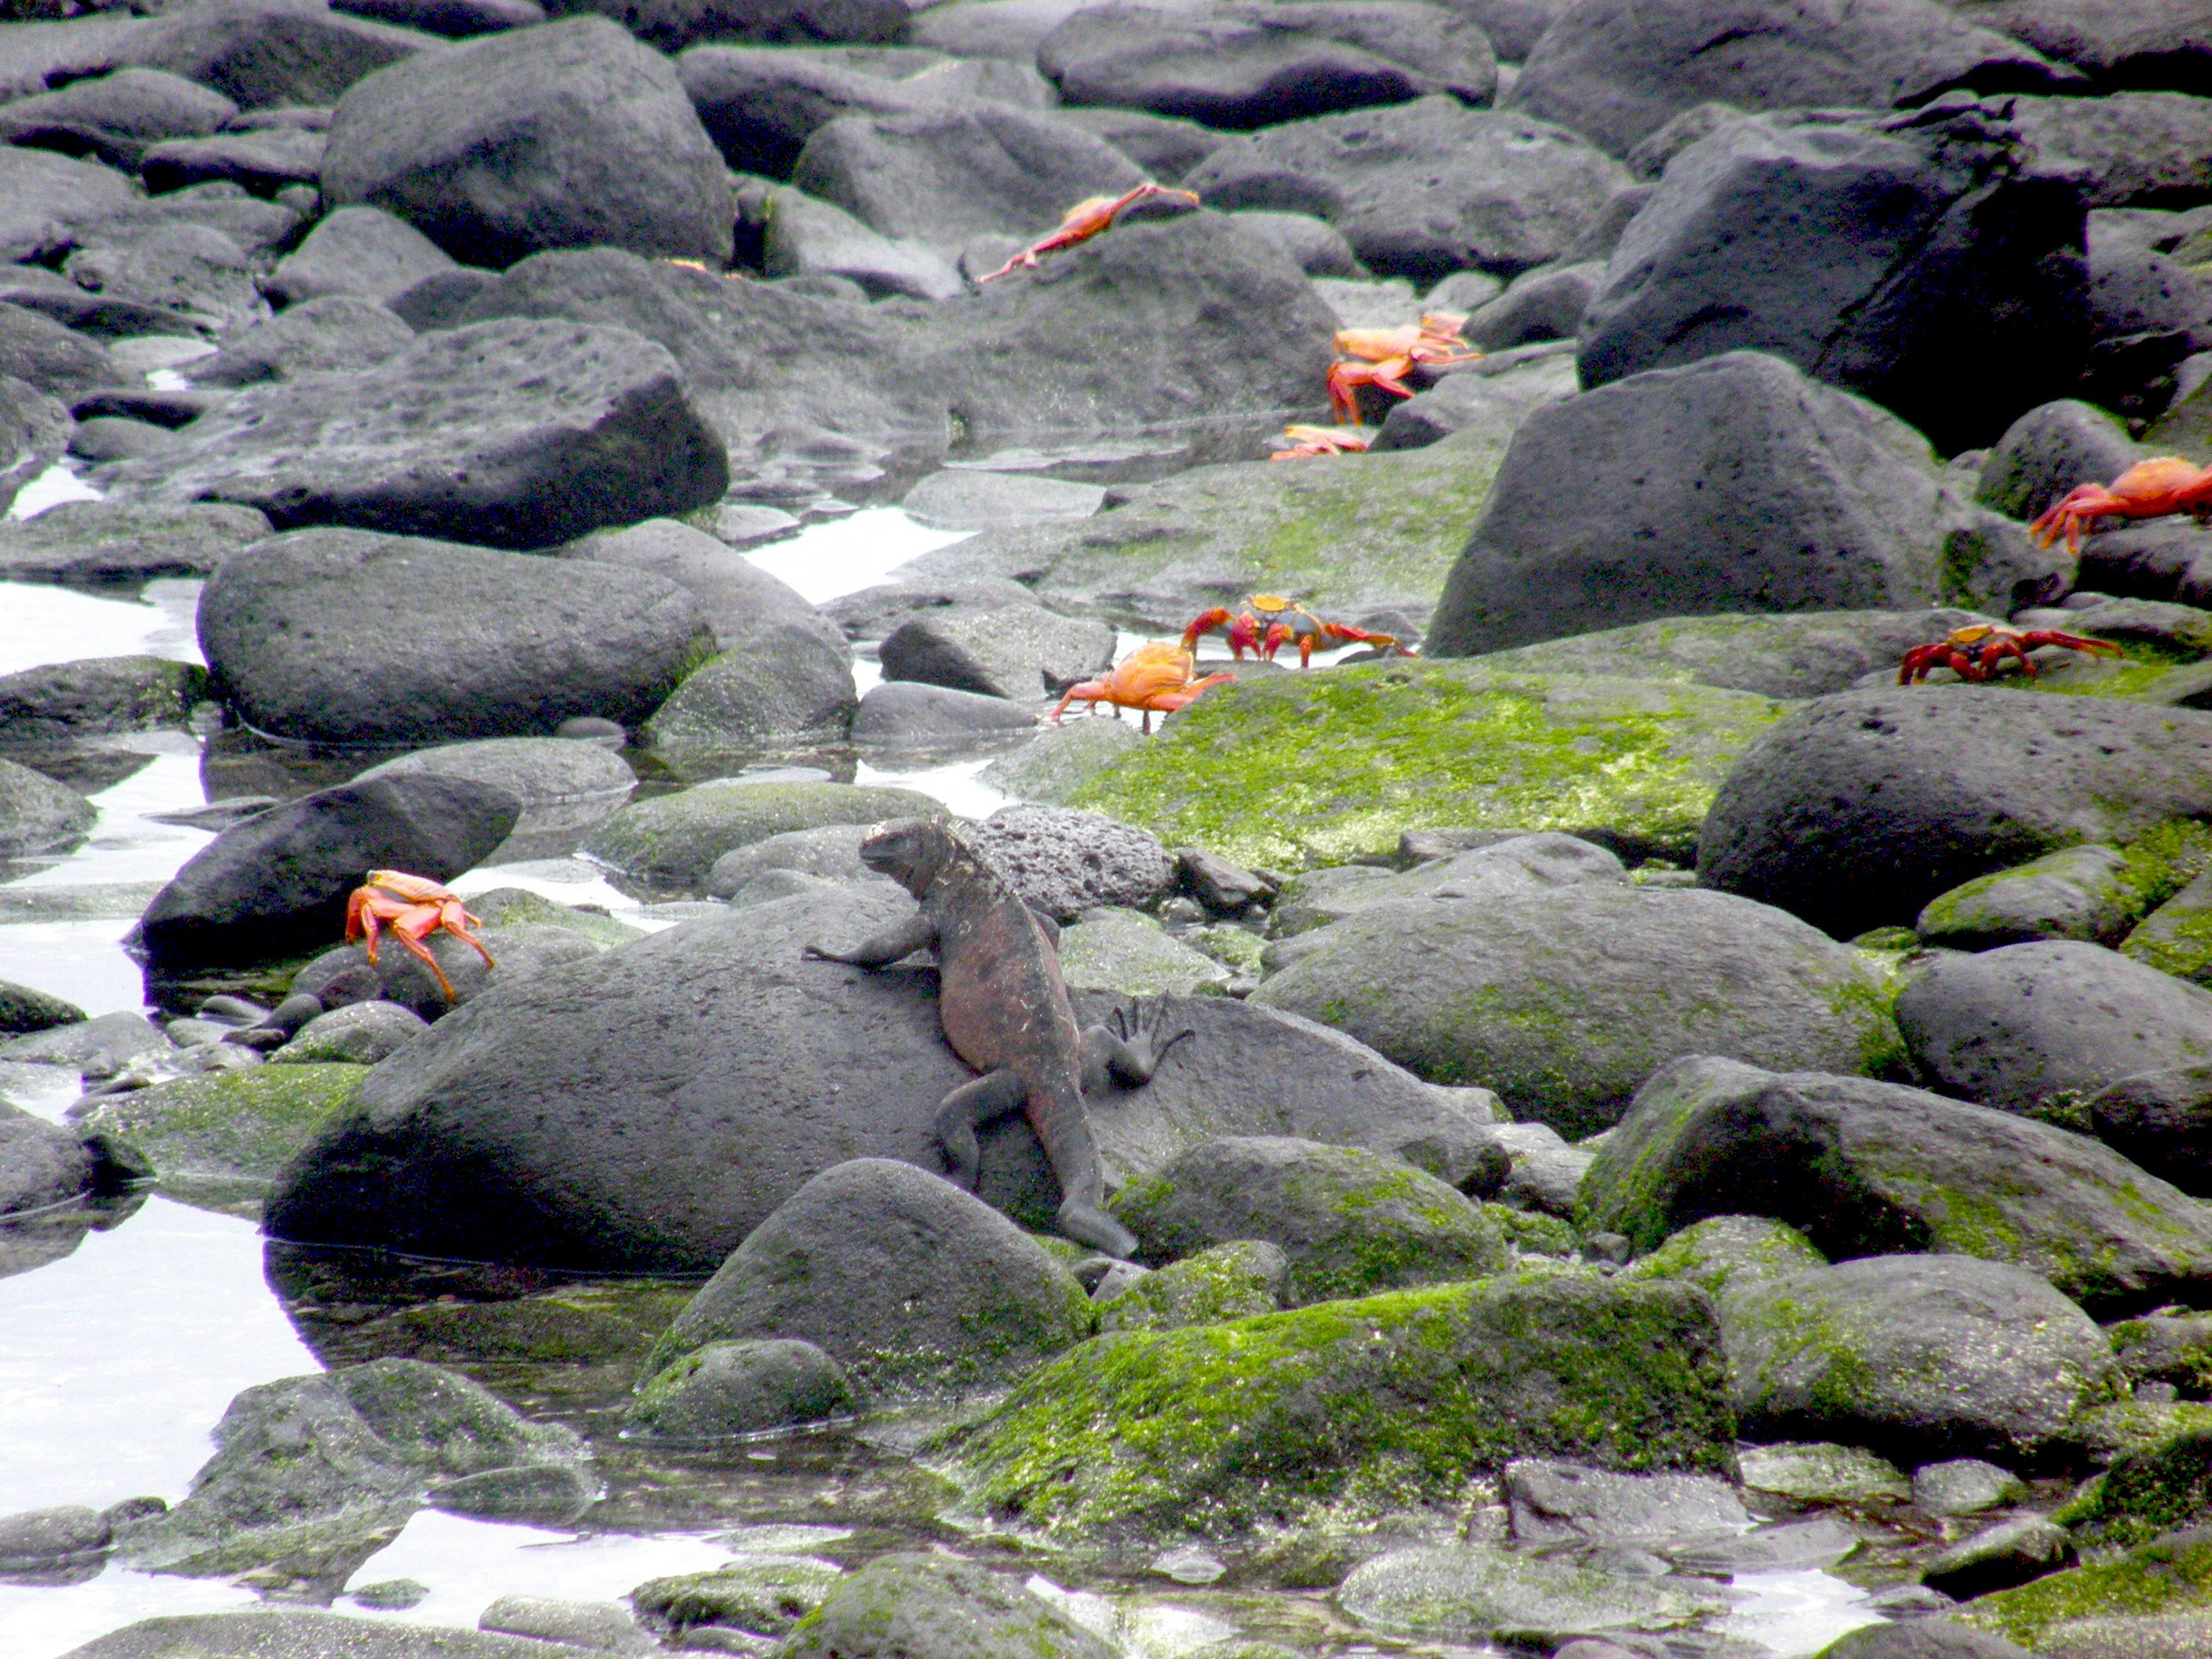 Bright orange crabs move across black rocks while being watched by an iguana